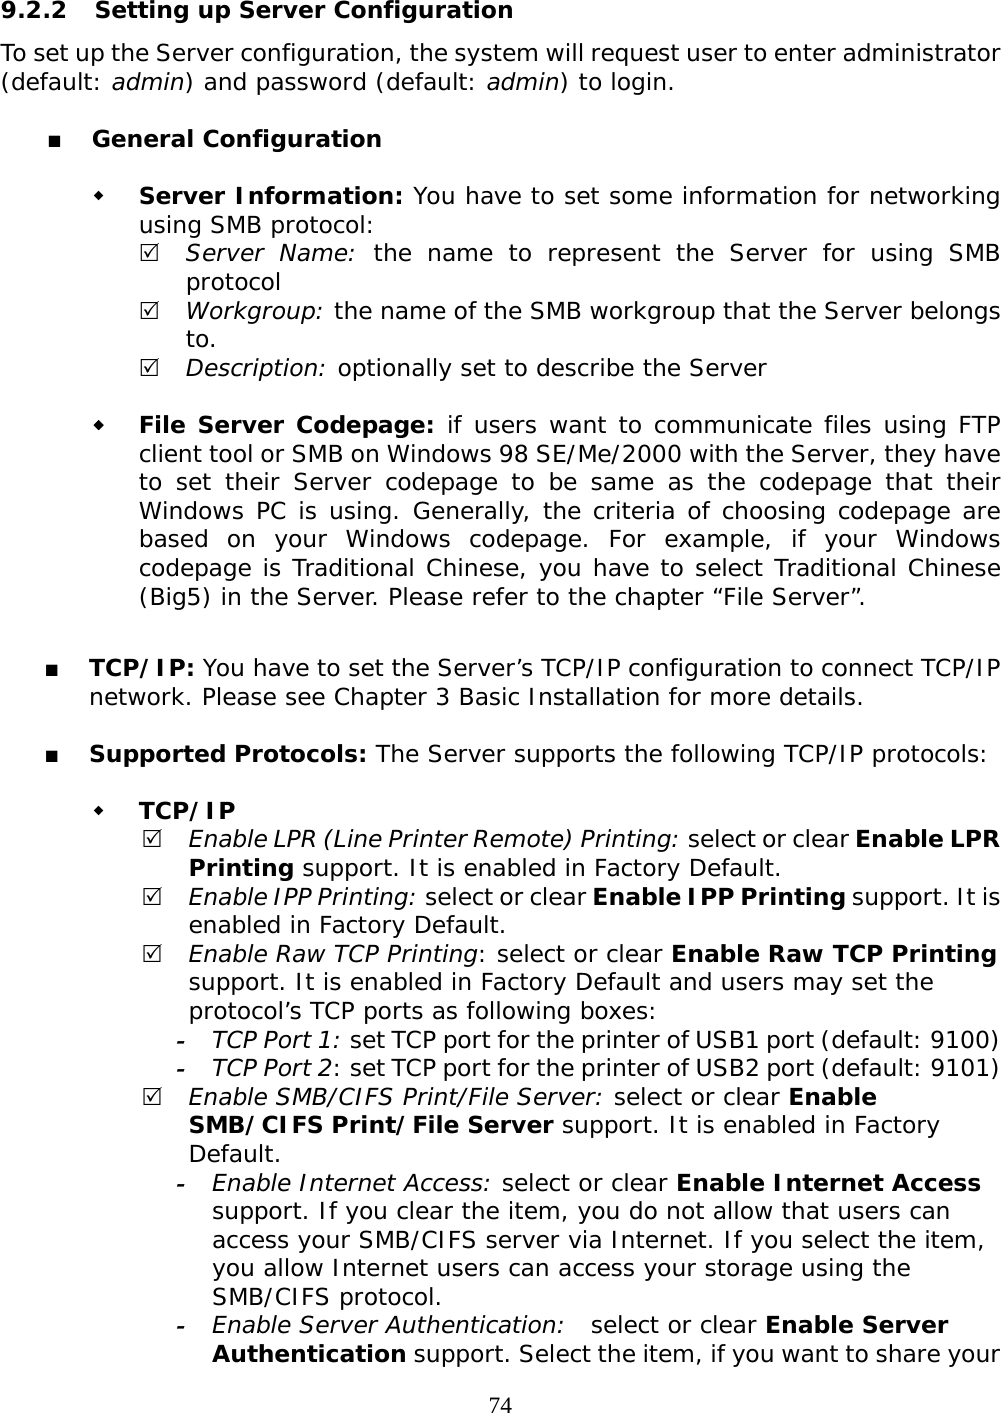     74 9.2.2  Setting up Server Configuration To set up the Server configuration, the system will request user to enter administrator (default: admin) and password (default: admin) to login.    General Configuration   Server Information: You have to set some information for networking using SMB protocol: 5 Server Name: the name to represent the Server for using SMB protocol 5 Workgroup: the name of the SMB workgroup that the Server belongs to. 5 Description: optionally set to describe the Server    File Server Codepage: if users want to communicate files using FTP client tool or SMB on Windows 98 SE/Me/2000 with the Server, they have to set their Server codepage to be same as the codepage that their Windows PC is using. Generally, the criteria of choosing codepage are based on your Windows codepage. For example, if your Windows codepage is Traditional Chinese, you have to select Traditional Chinese (Big5) in the Server. Please refer to the chapter “File Server”.   TCP/IP: You have to set the Server’s TCP/IP configuration to connect TCP/IP network. Please see Chapter 3 Basic Installation for more details.   Supported Protocols: The Server supports the following TCP/IP protocols:   TCP/IP 5 Enable LPR (Line Printer Remote) Printing: select or clear Enable LPR Printing support. It is enabled in Factory Default. 5 Enable IPP Printing: select or clear Enable IPP Printing support. It is enabled in Factory Default. 5 Enable Raw TCP Printing: select or clear Enable Raw TCP Printing support. It is enabled in Factory Default and users may set the protocol’s TCP ports as following boxes: - TCP Port 1: set TCP port for the printer of USB1 port (default: 9100) - TCP Port 2: set TCP port for the printer of USB2 port (default: 9101) 5 Enable SMB/CIFS Print/File Server: select or clear Enable SMB/CIFS Print/File Server support. It is enabled in Factory Default. - Enable Internet Access: select or clear Enable Internet Access support. If you clear the item, you do not allow that users can access your SMB/CIFS server via Internet. If you select the item, you allow Internet users can access your storage using the SMB/CIFS protocol. - Enable Server Authentication:  select or clear Enable Server Authentication support. Select the item, if you want to share your 